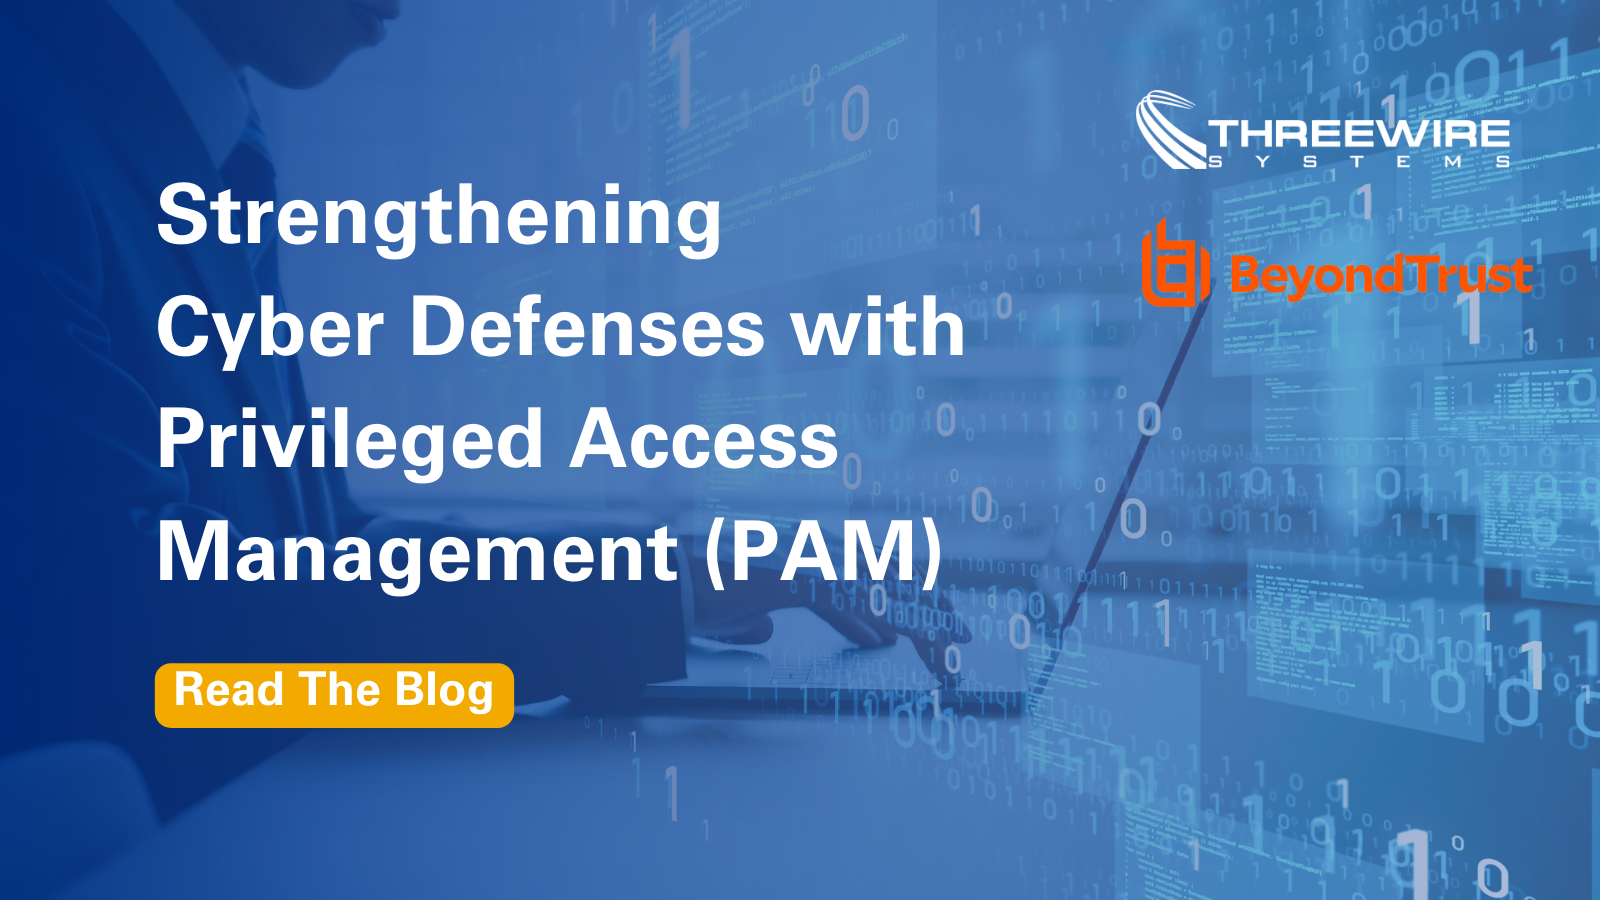 Strengthen Security Solutions with Privileged Access Management